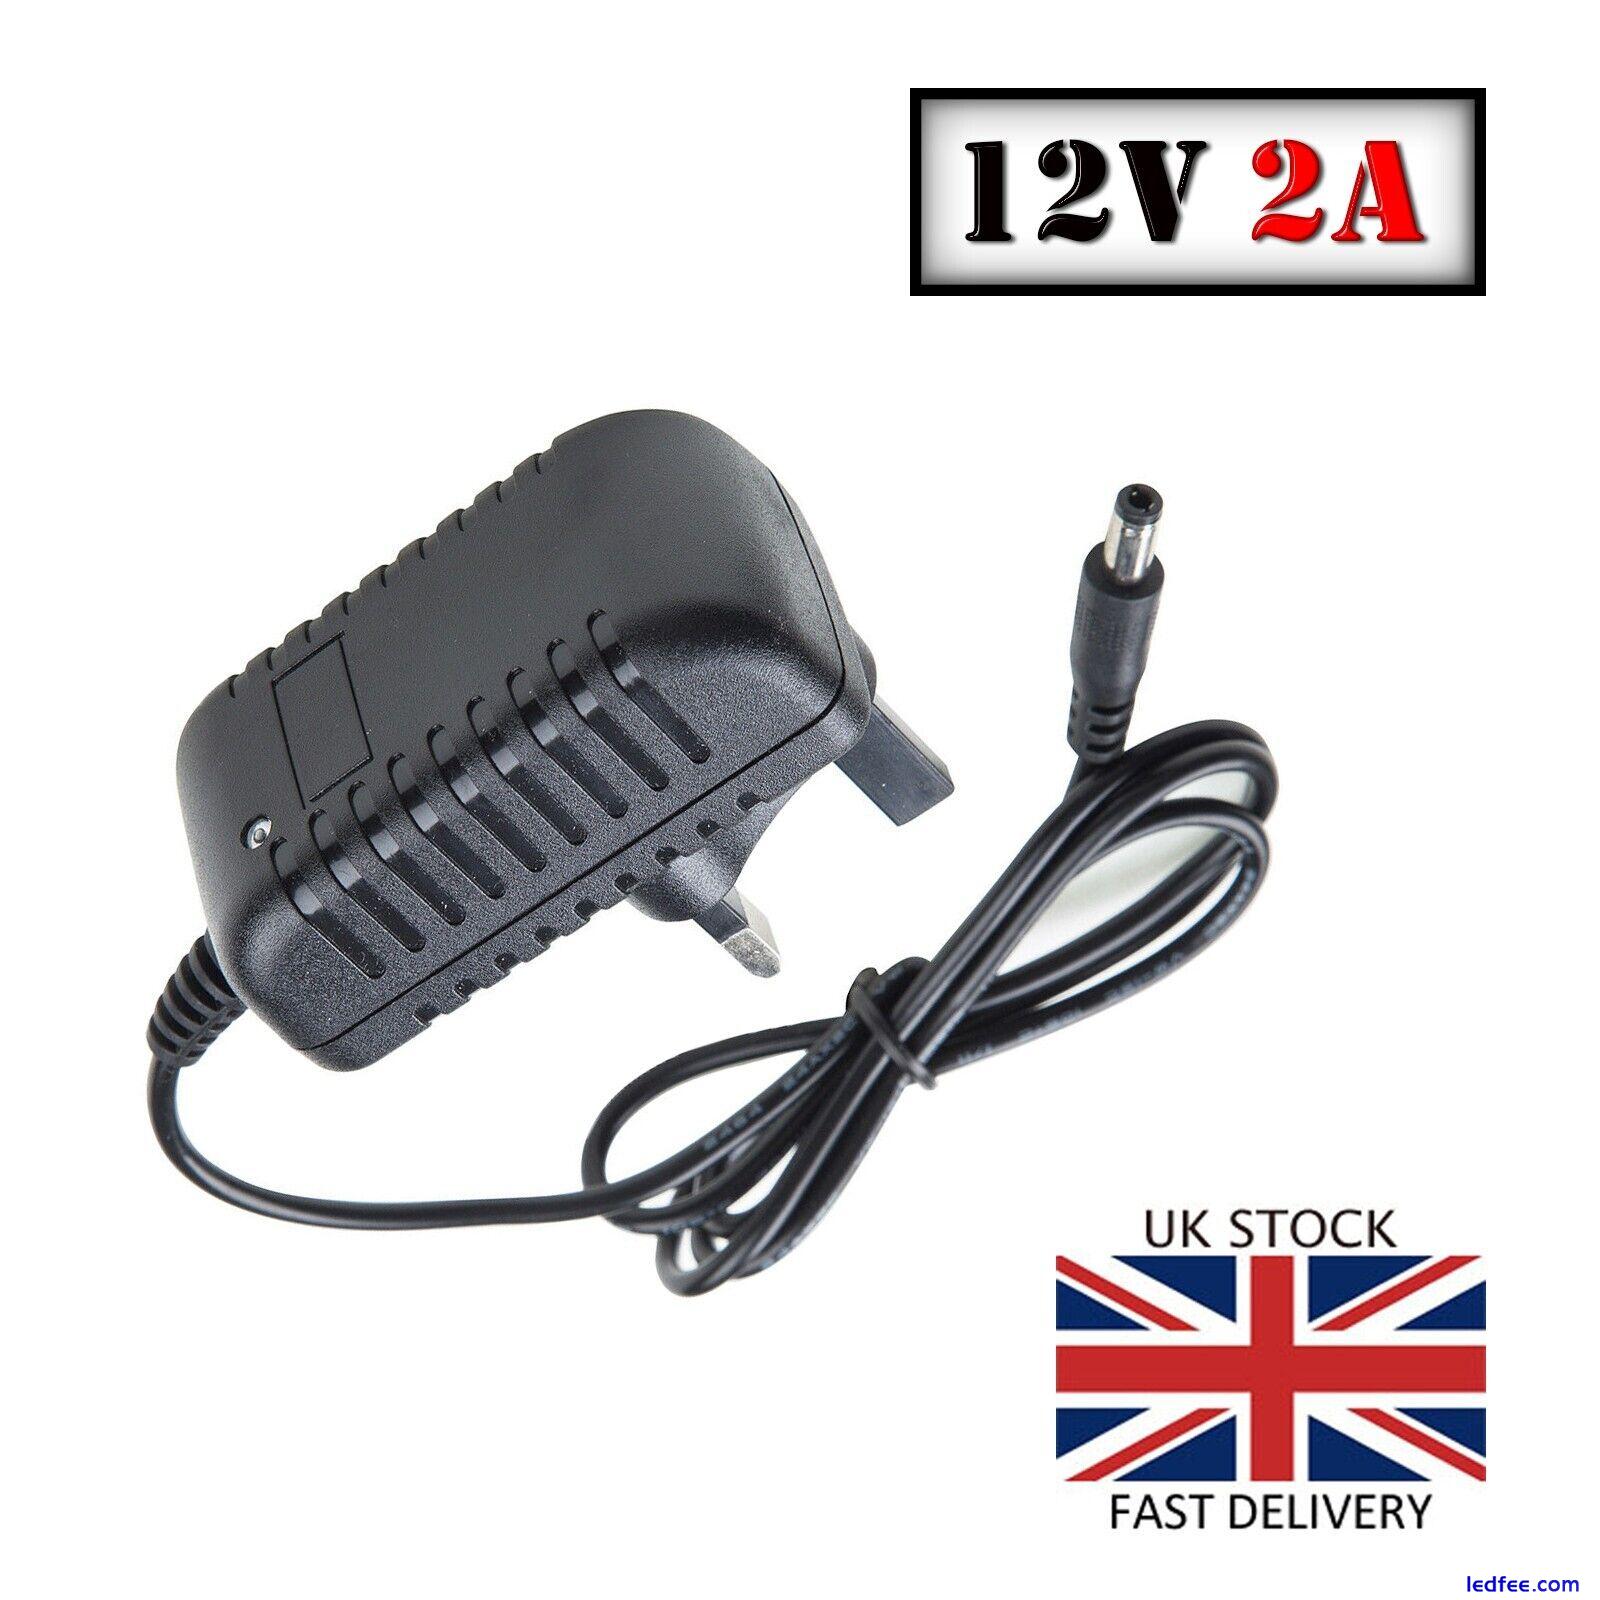 10 x 2A AC/DC UK Power Supply Adapter Safety Charger For LED Strip CCTV Camera 2 